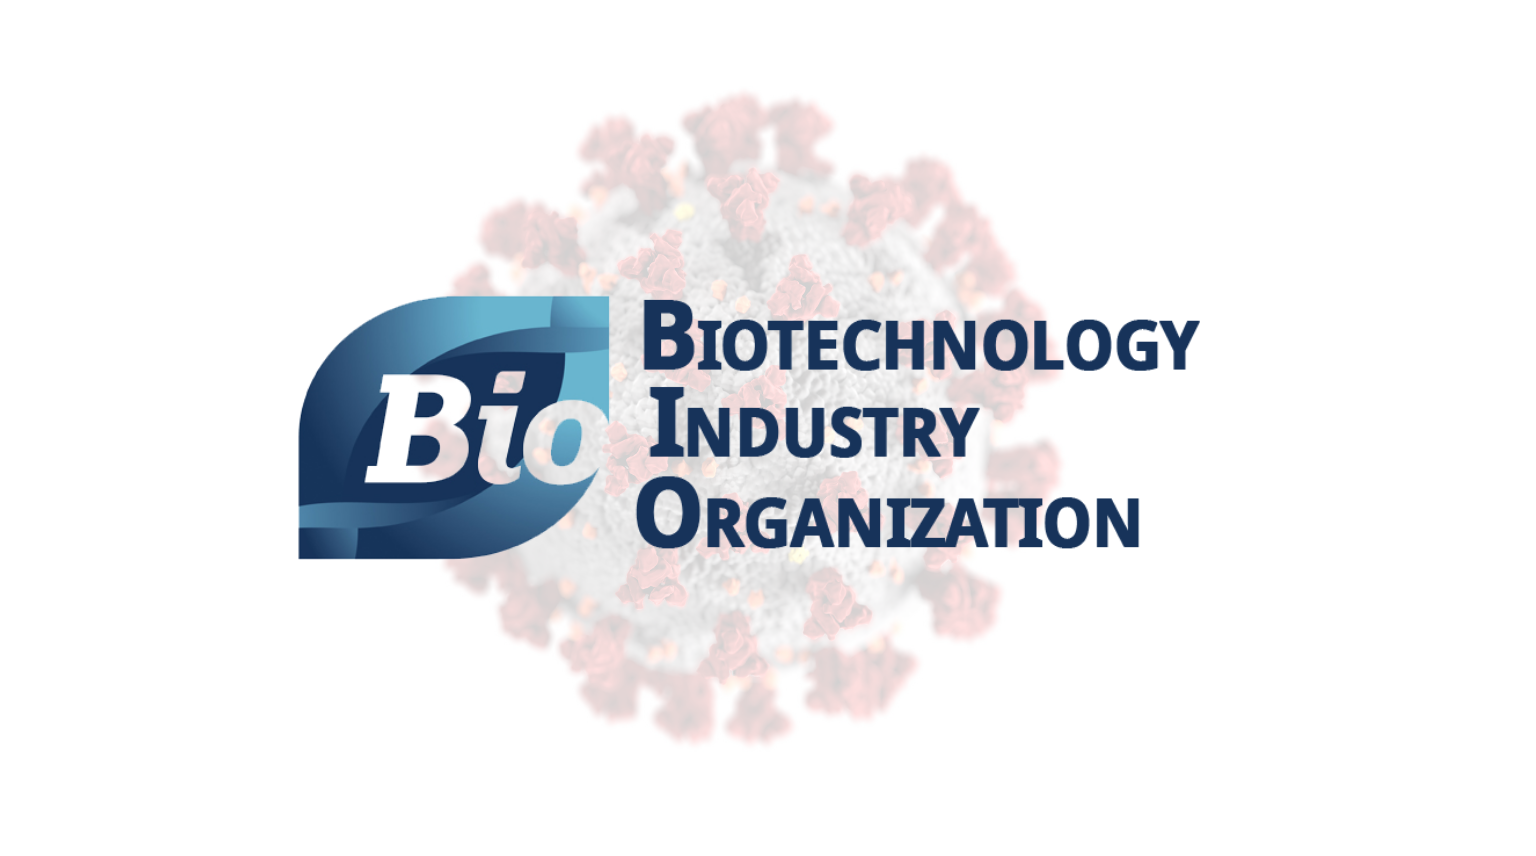 Biotech Leaders Outline Principles to Ensure “Public’s Trust” in COVID